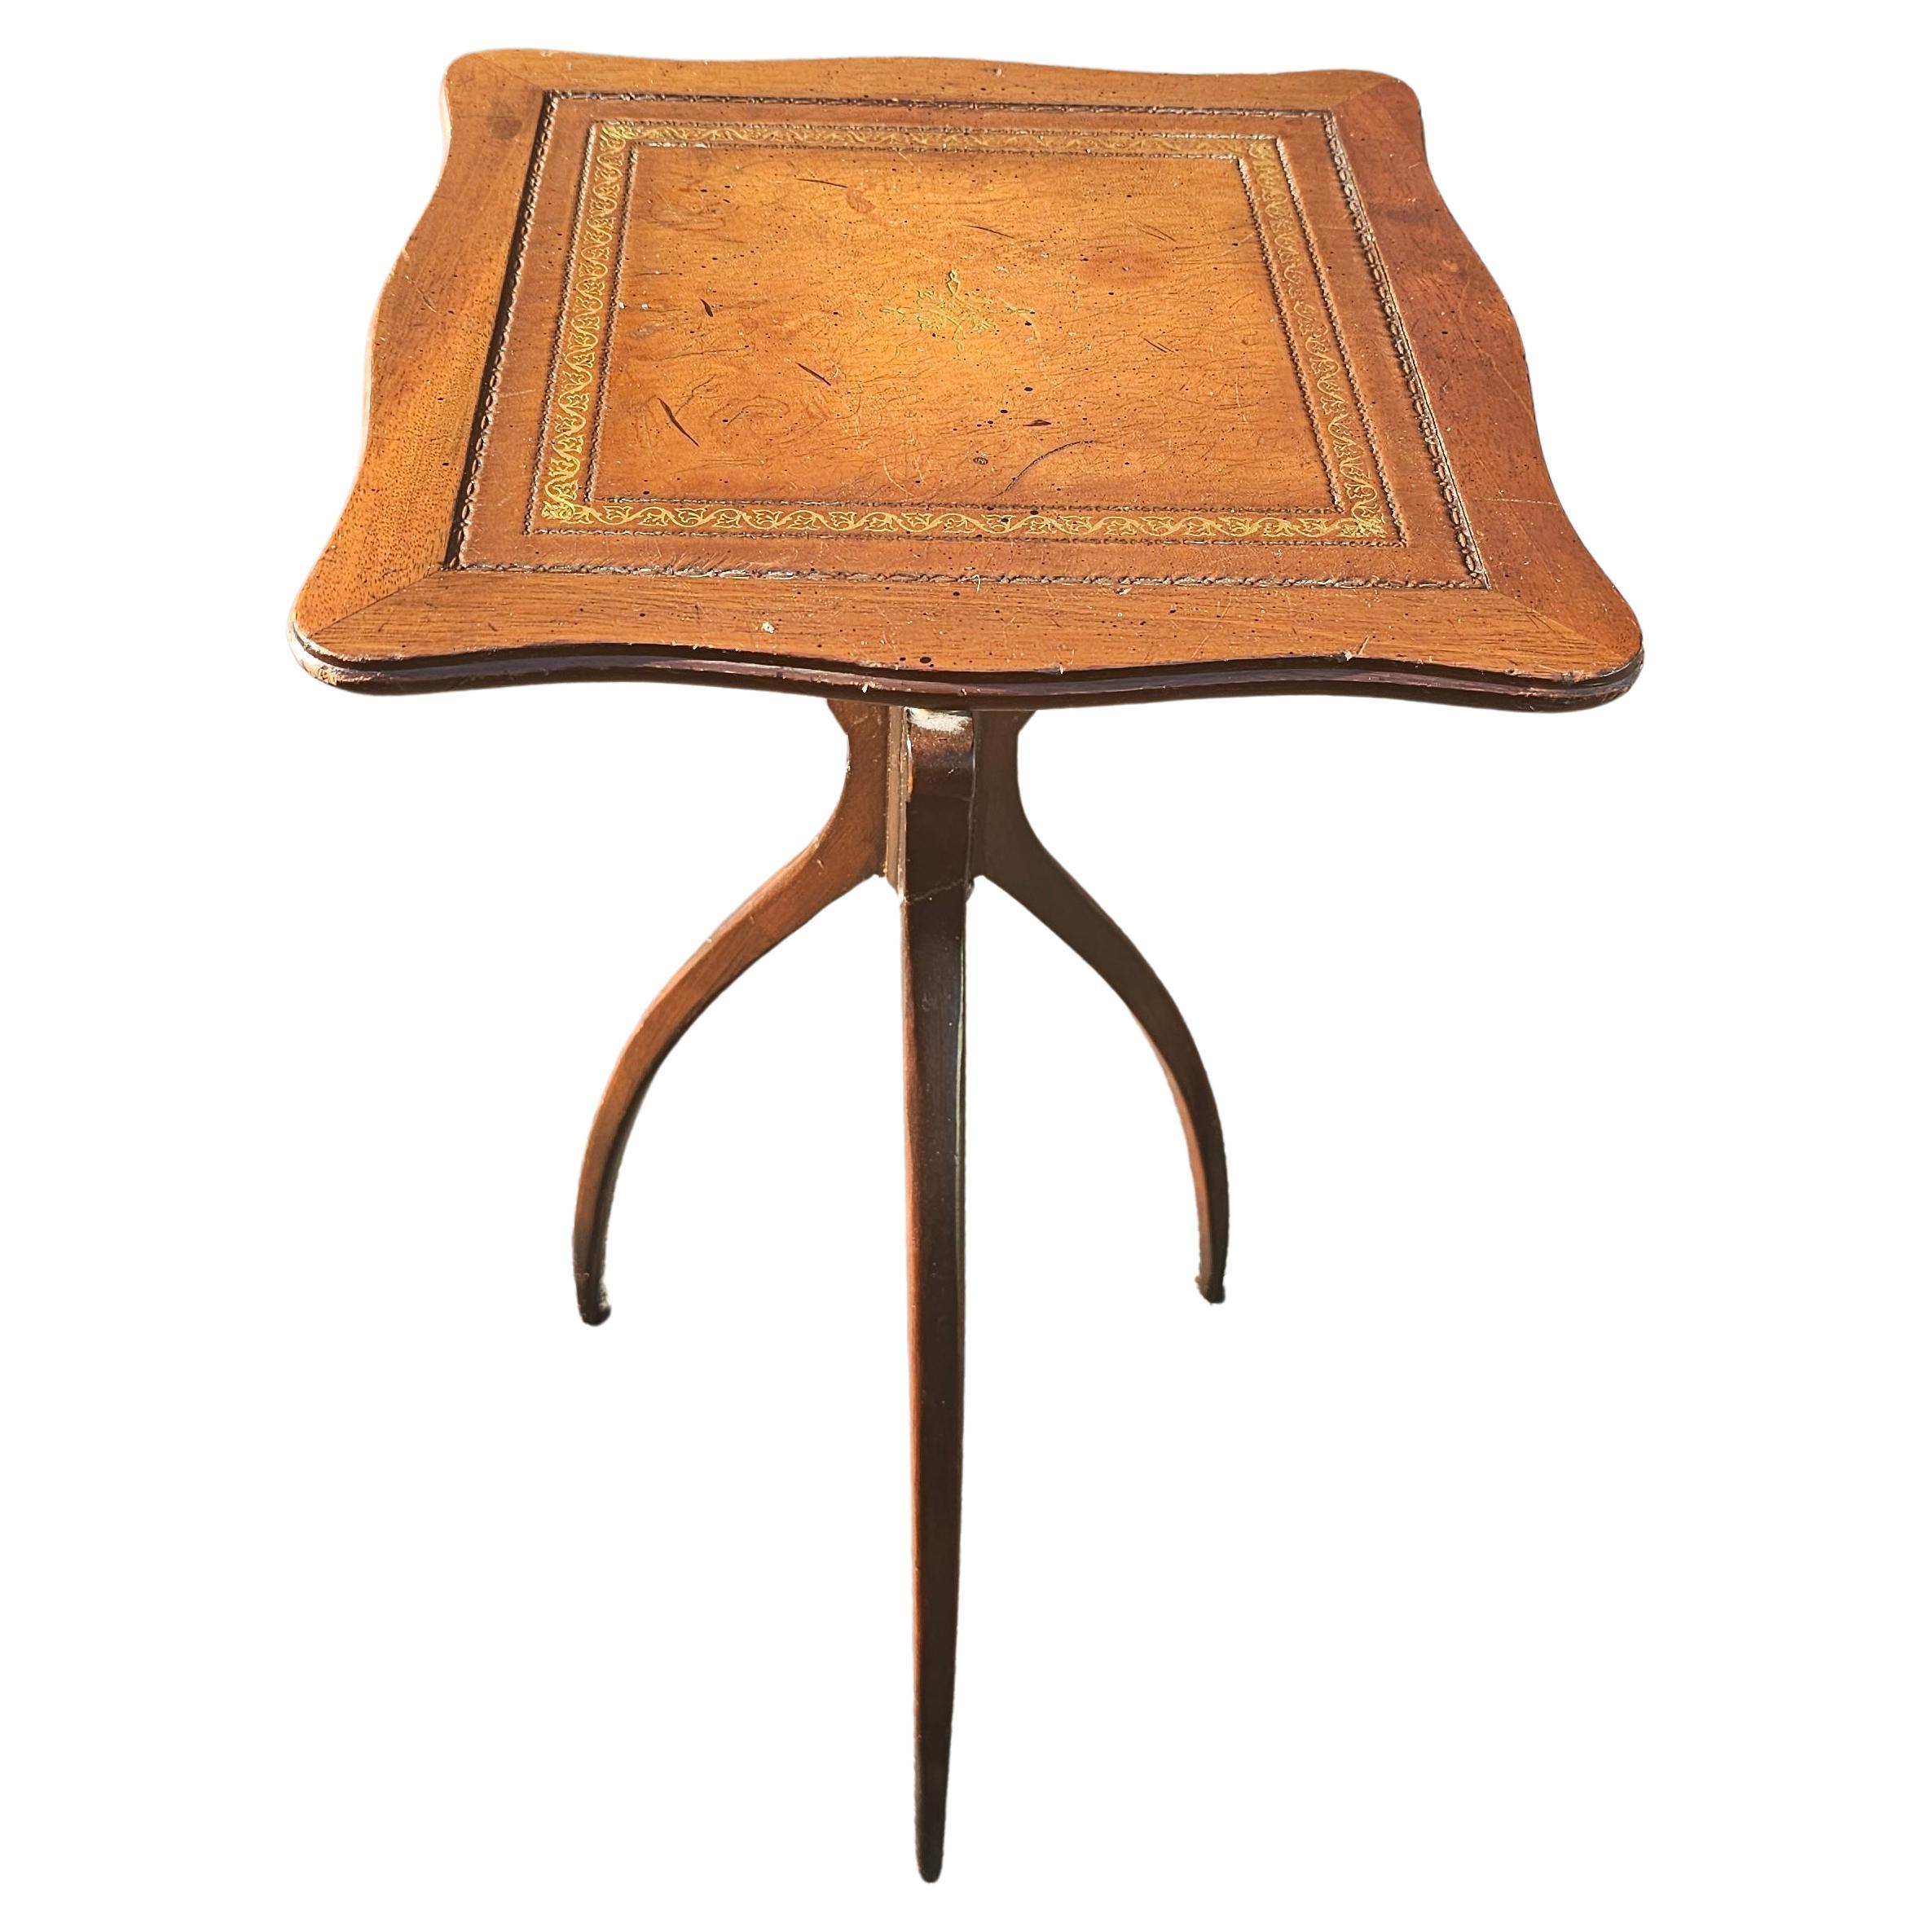 Hollywood Regency Mid 20th Century Spider Tripod Mahogany and Tooled Leather Top Candle Stand For Sale